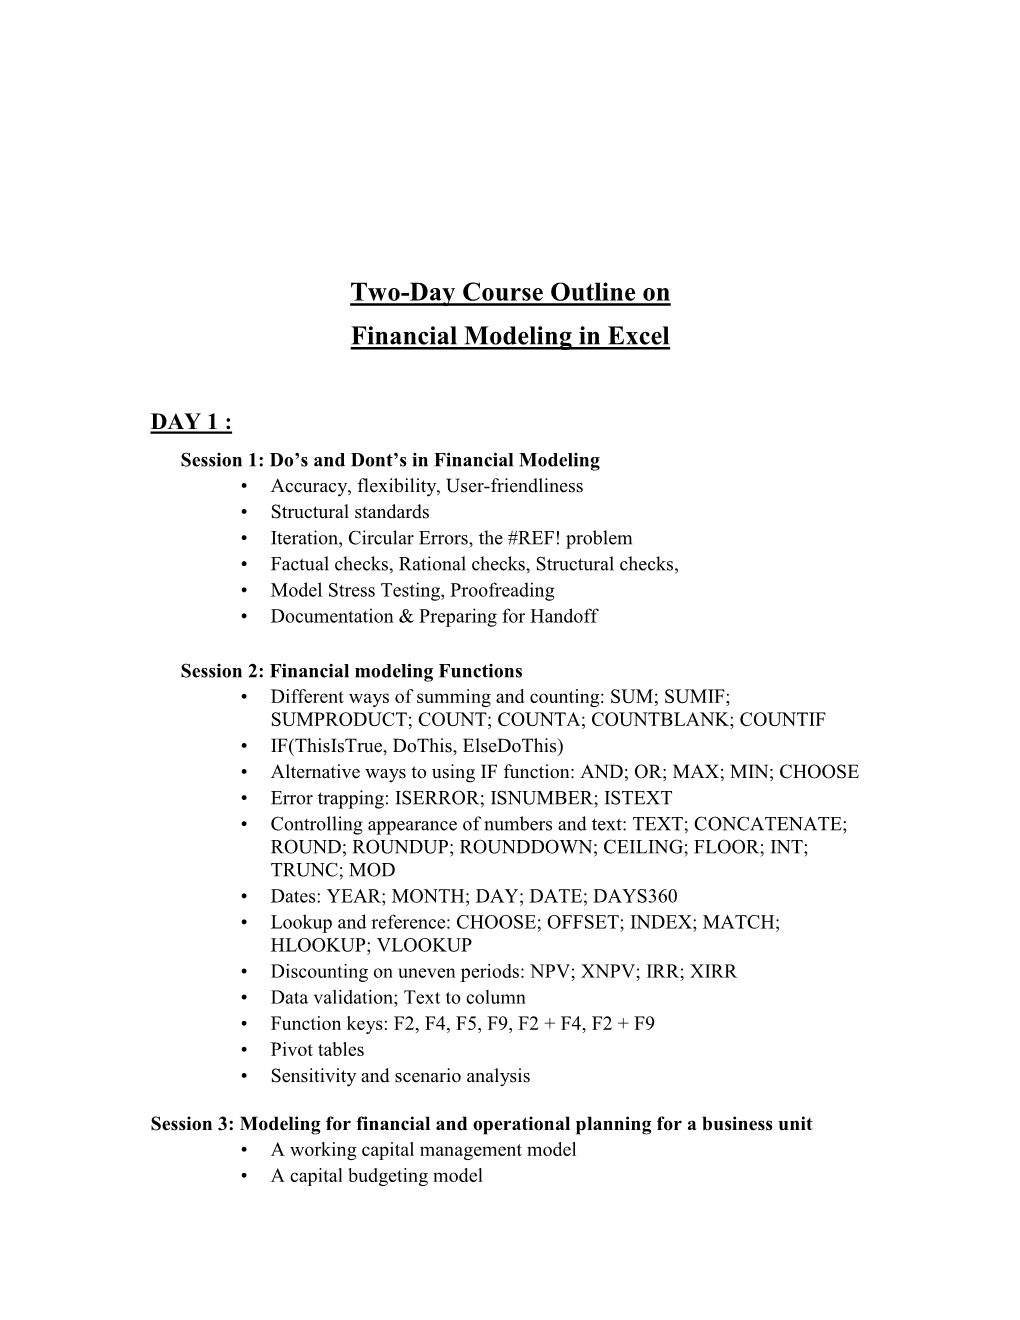 2 Day Course Outline on Financial Modeling on Excel